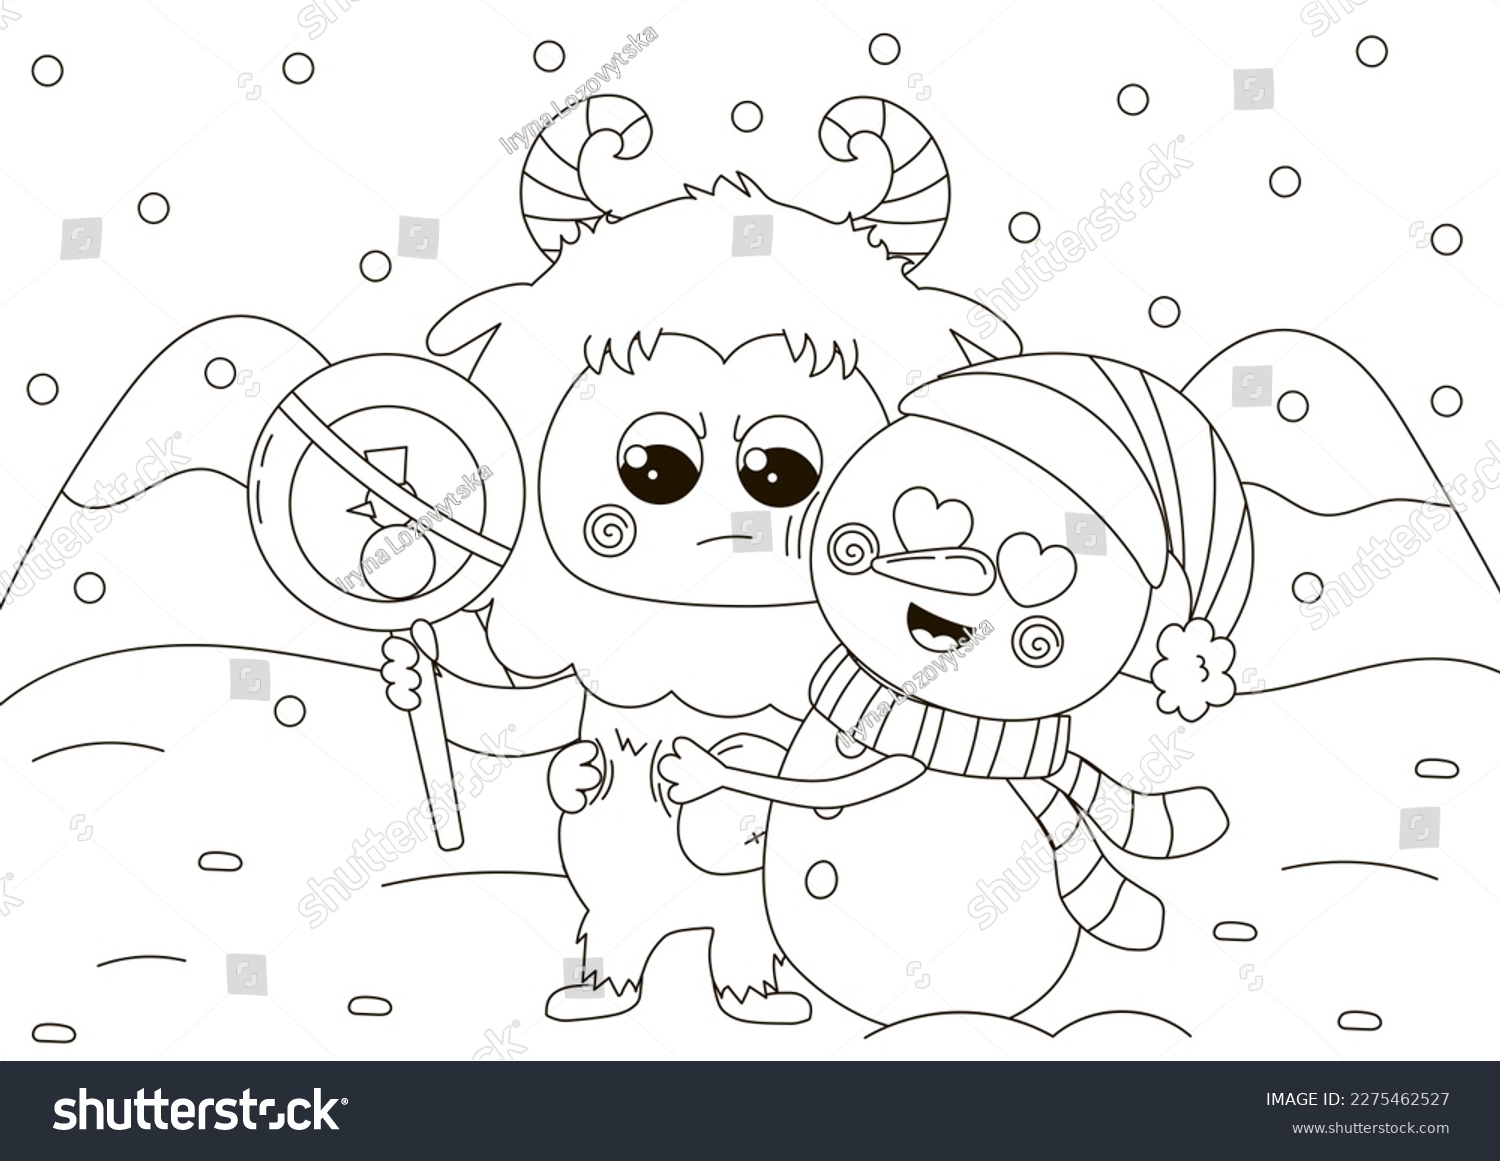 Funny coloring page cute angry yeti stock vector royalty free